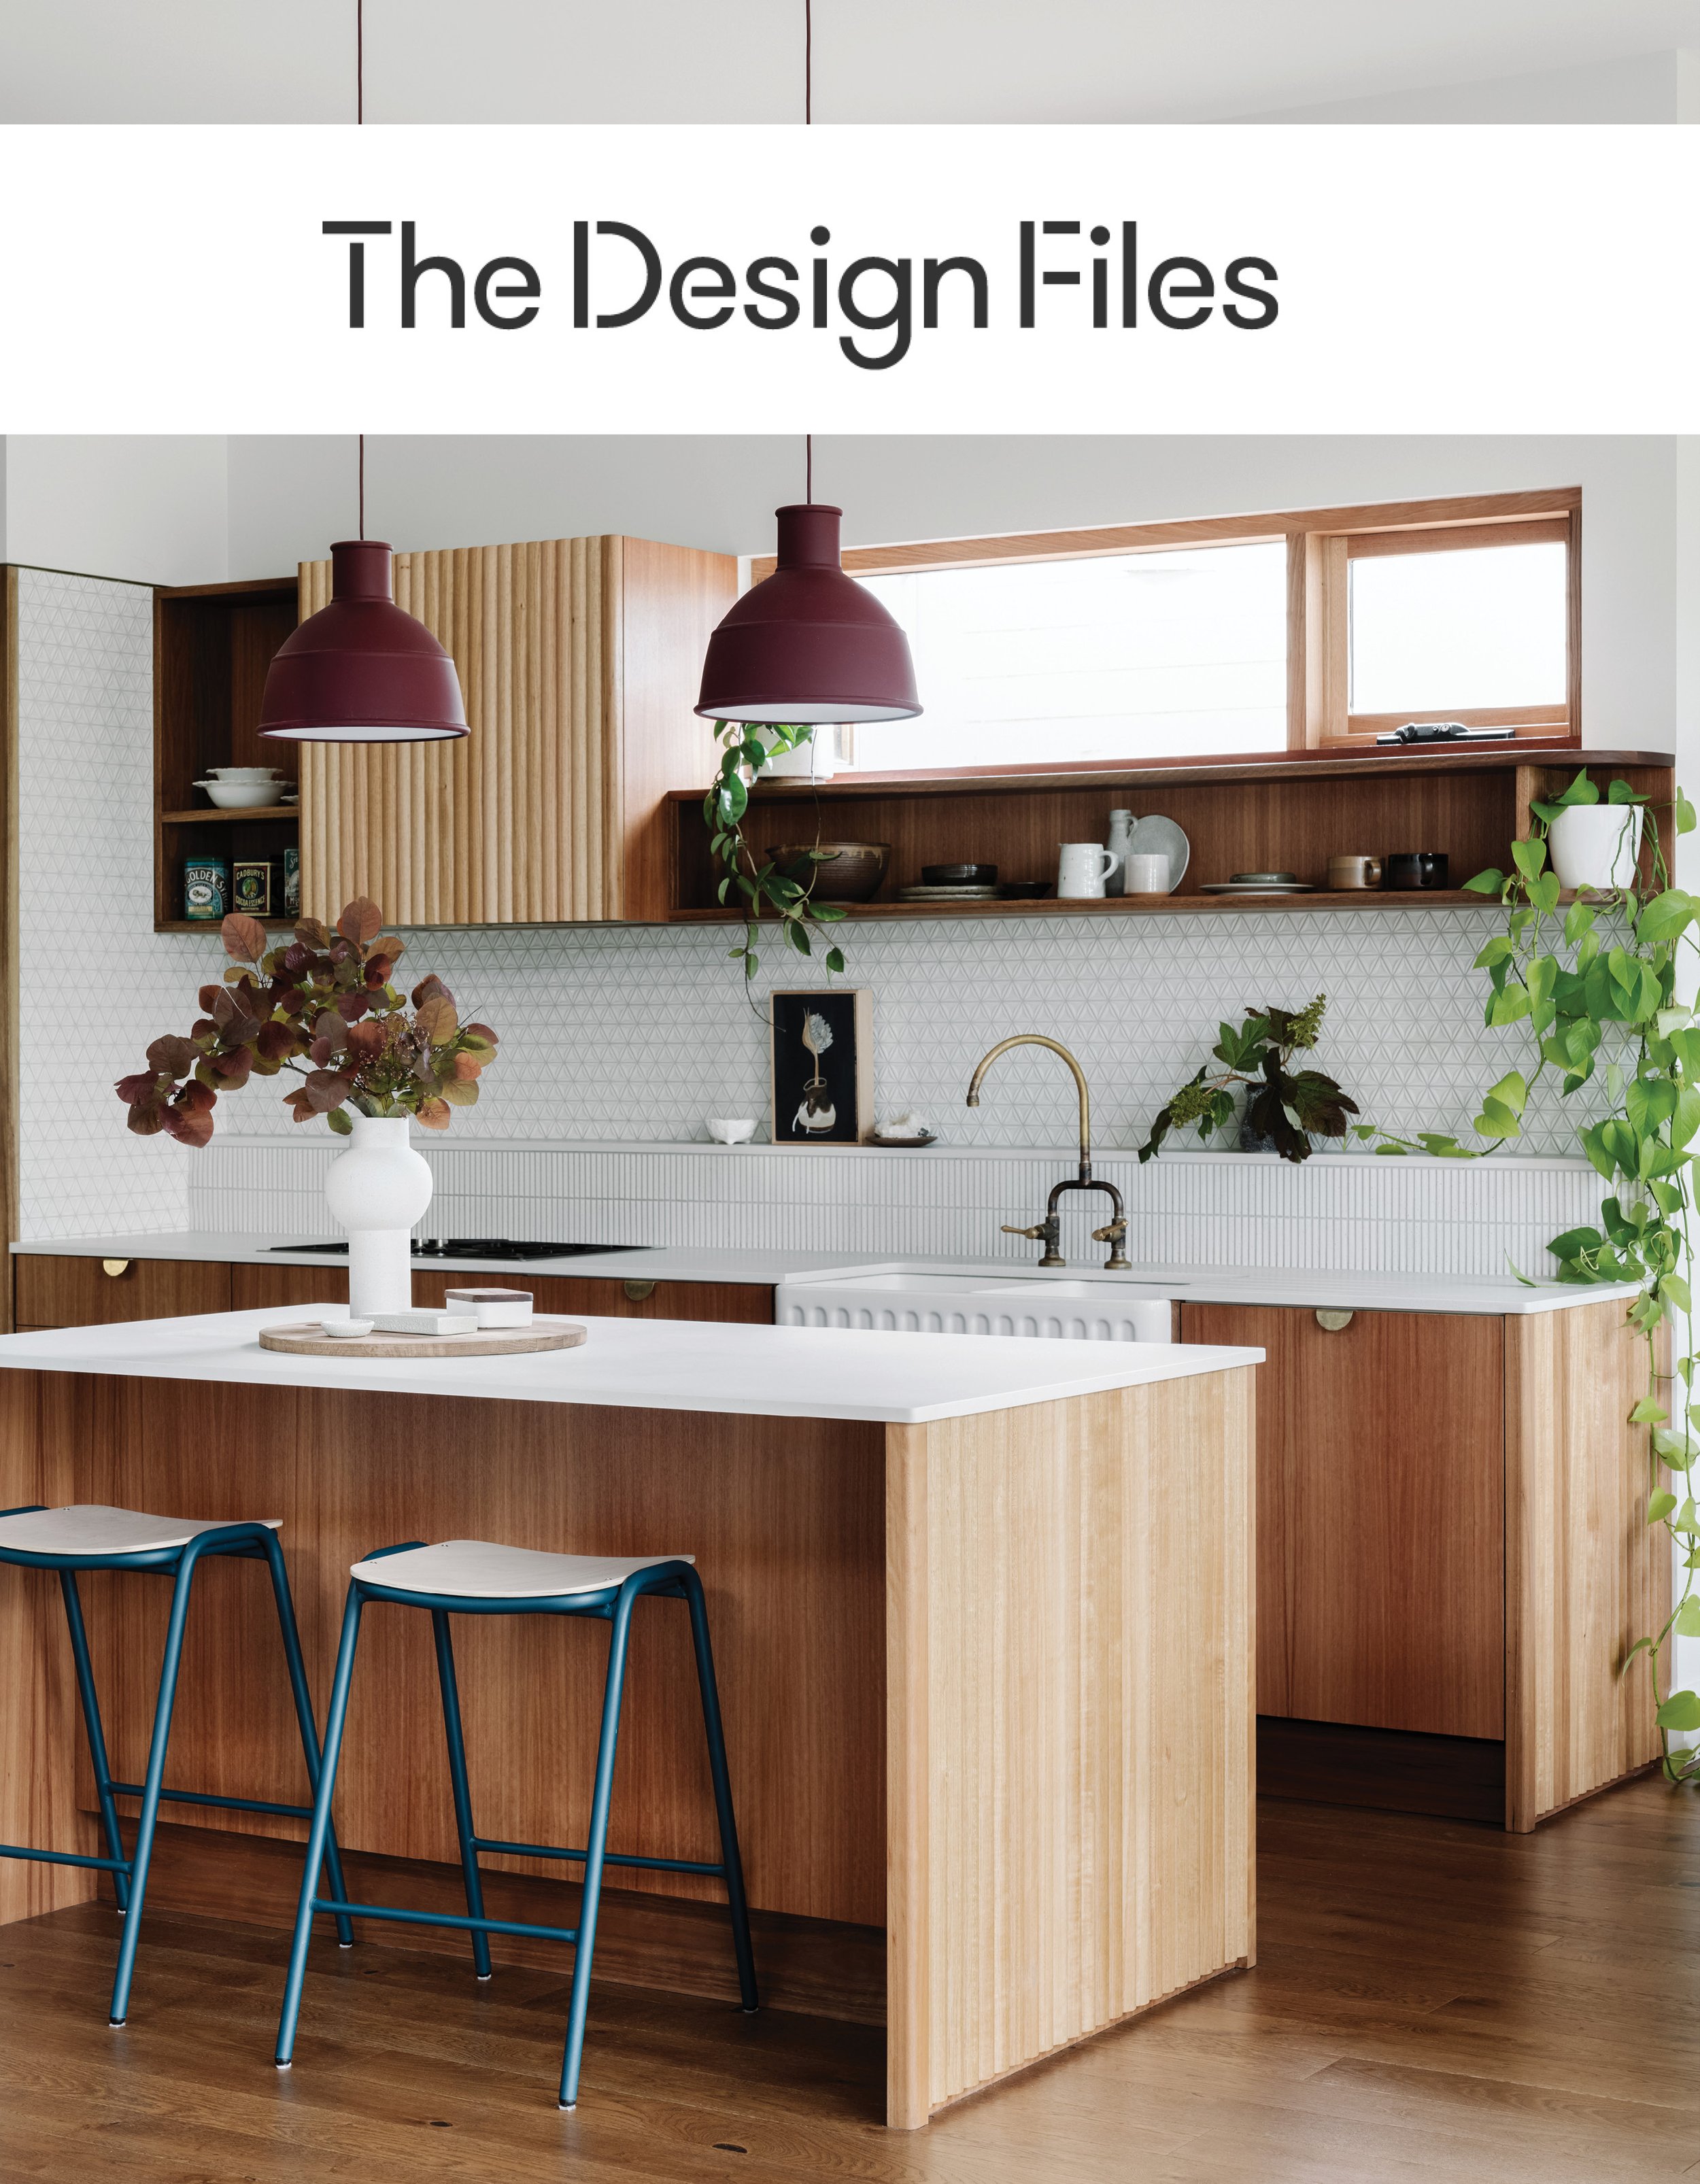 The Design Files - A Green New Addition